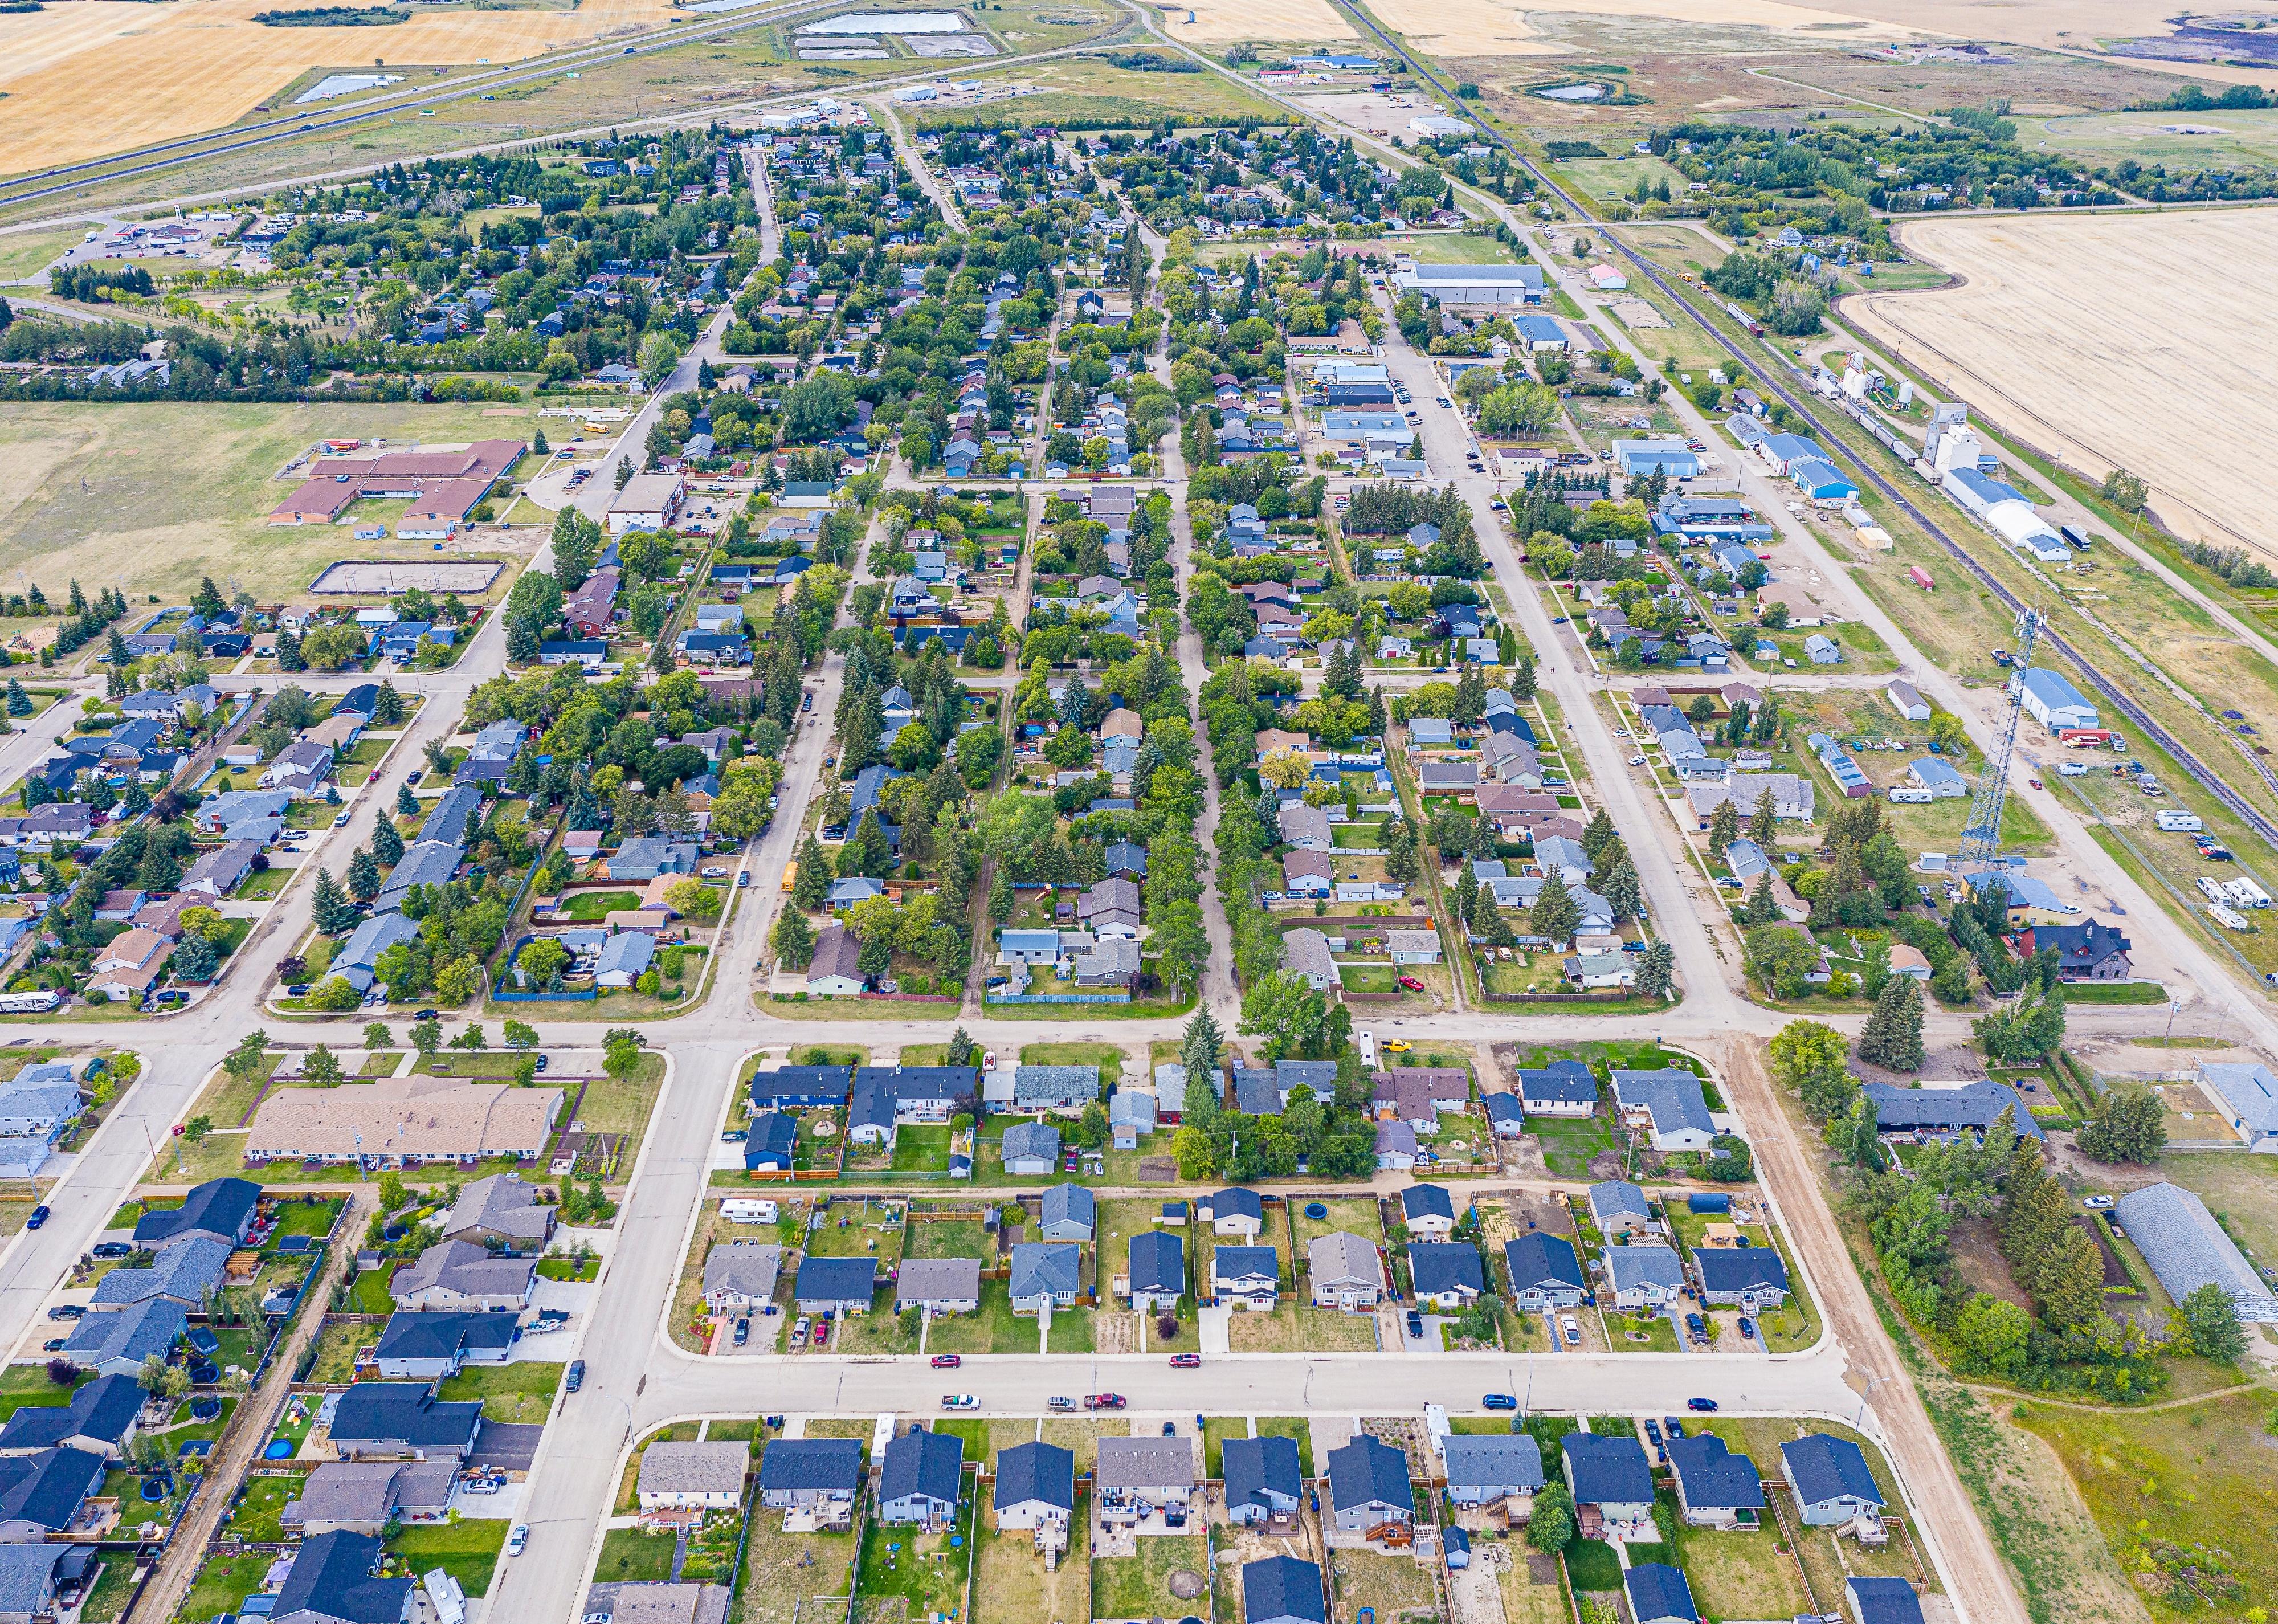 Aerial drone view of the town of Langham in Saskatchewan, Canada